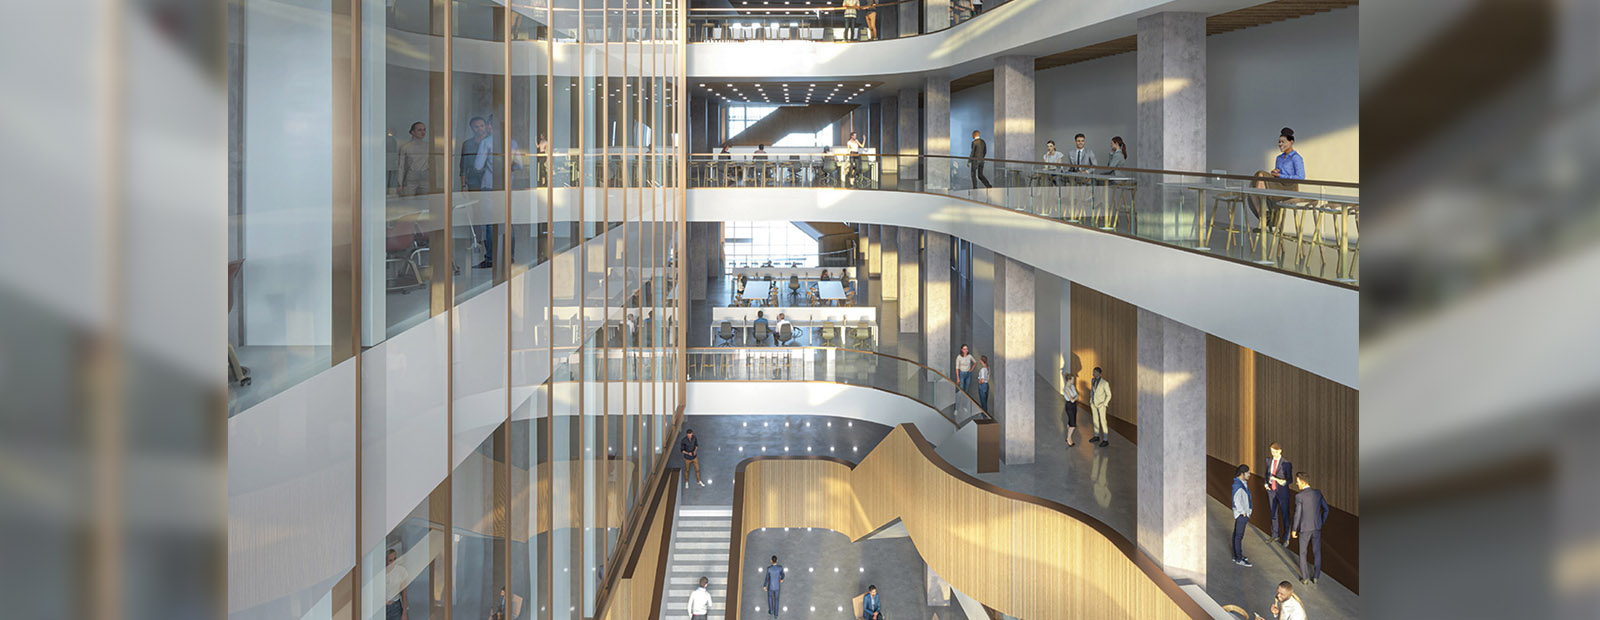 Artist's rendering of the interior of MacEwan's planned new building